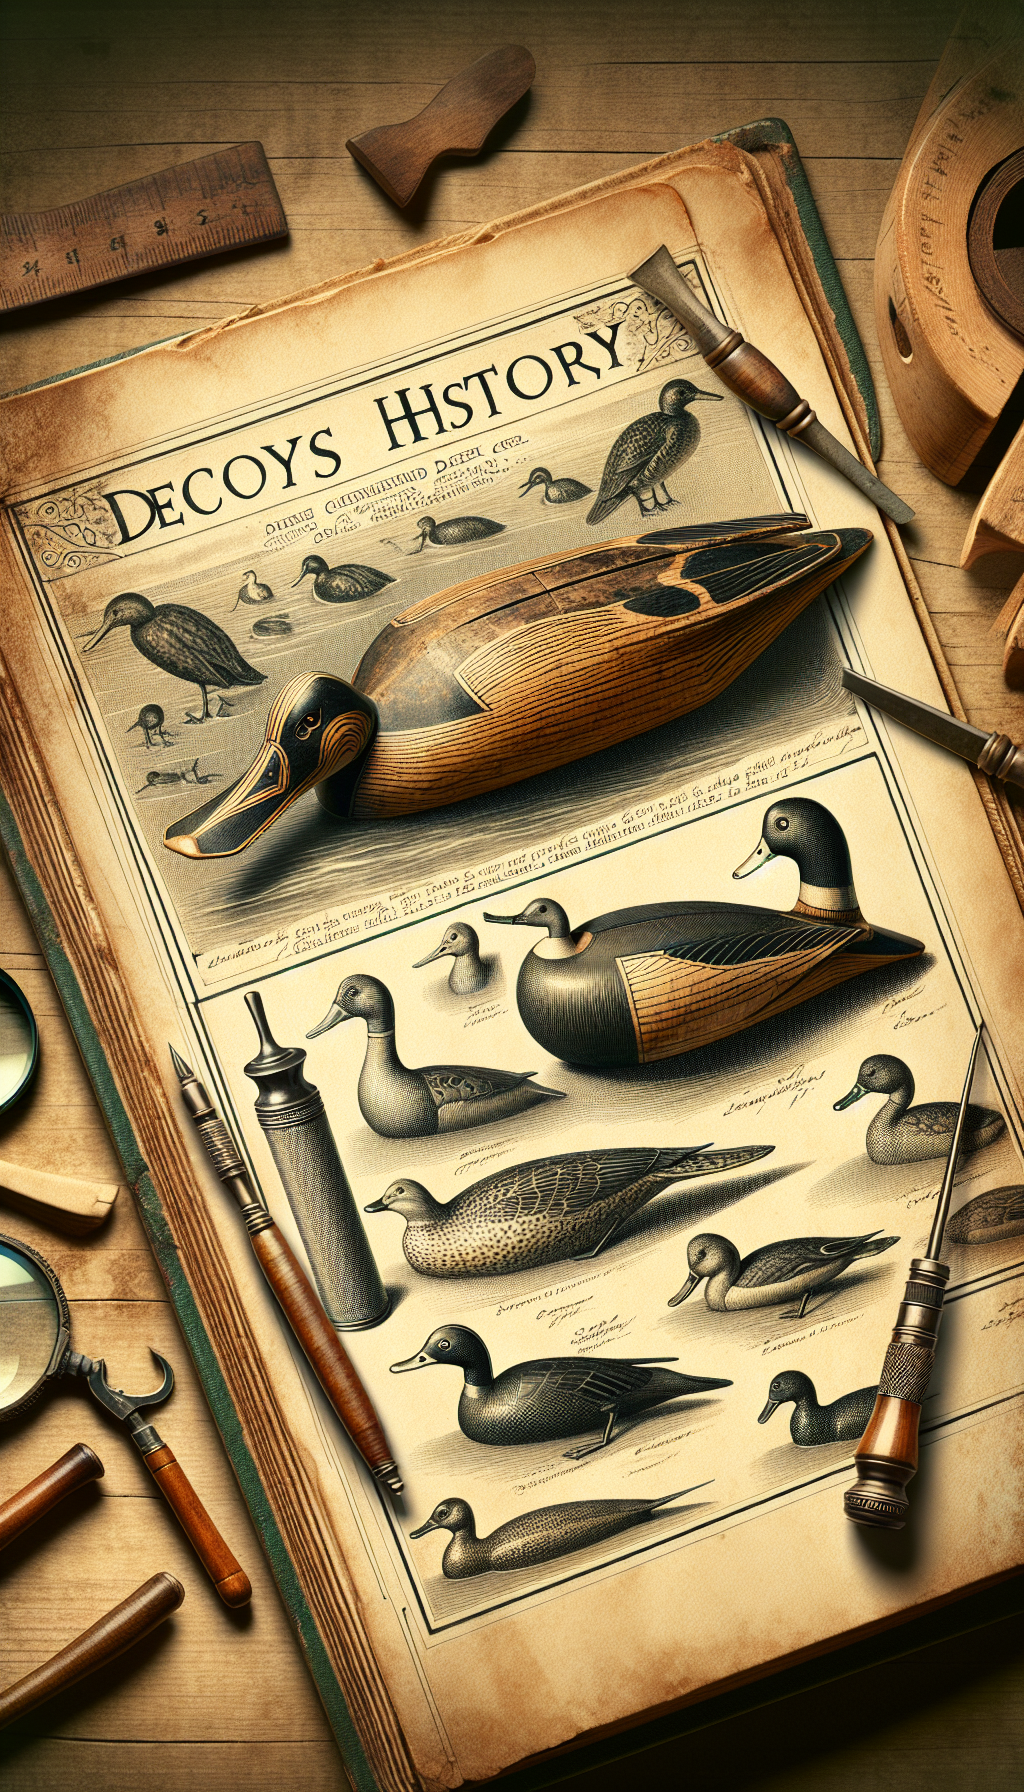 An illustration showcases a weathered wooden duck decoy perched atop an elegantly-bound book labeled "Decoys History." Intricate engravings of carvings tools and collectors’ magnifying glasses frame the scenery, while faded sketches of rare decoys ripple across the page corners, hinting at the sought-after identification guide. Antique font titles splash the foreground, creating an aura of vintage investigation.